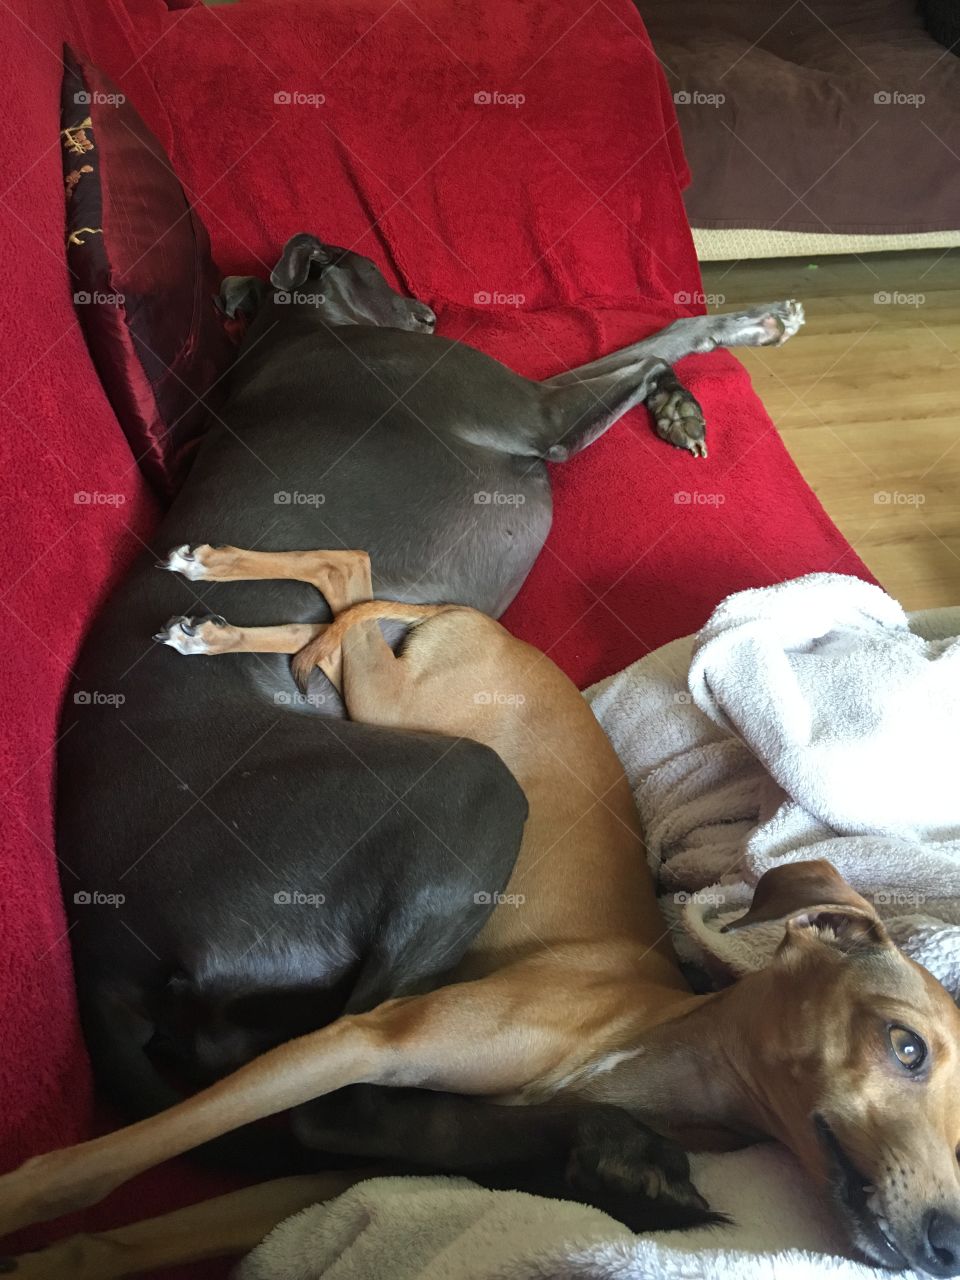 Amber the Italian greyhound puppy and Libby the whippet entangled and relaxing on the sofa